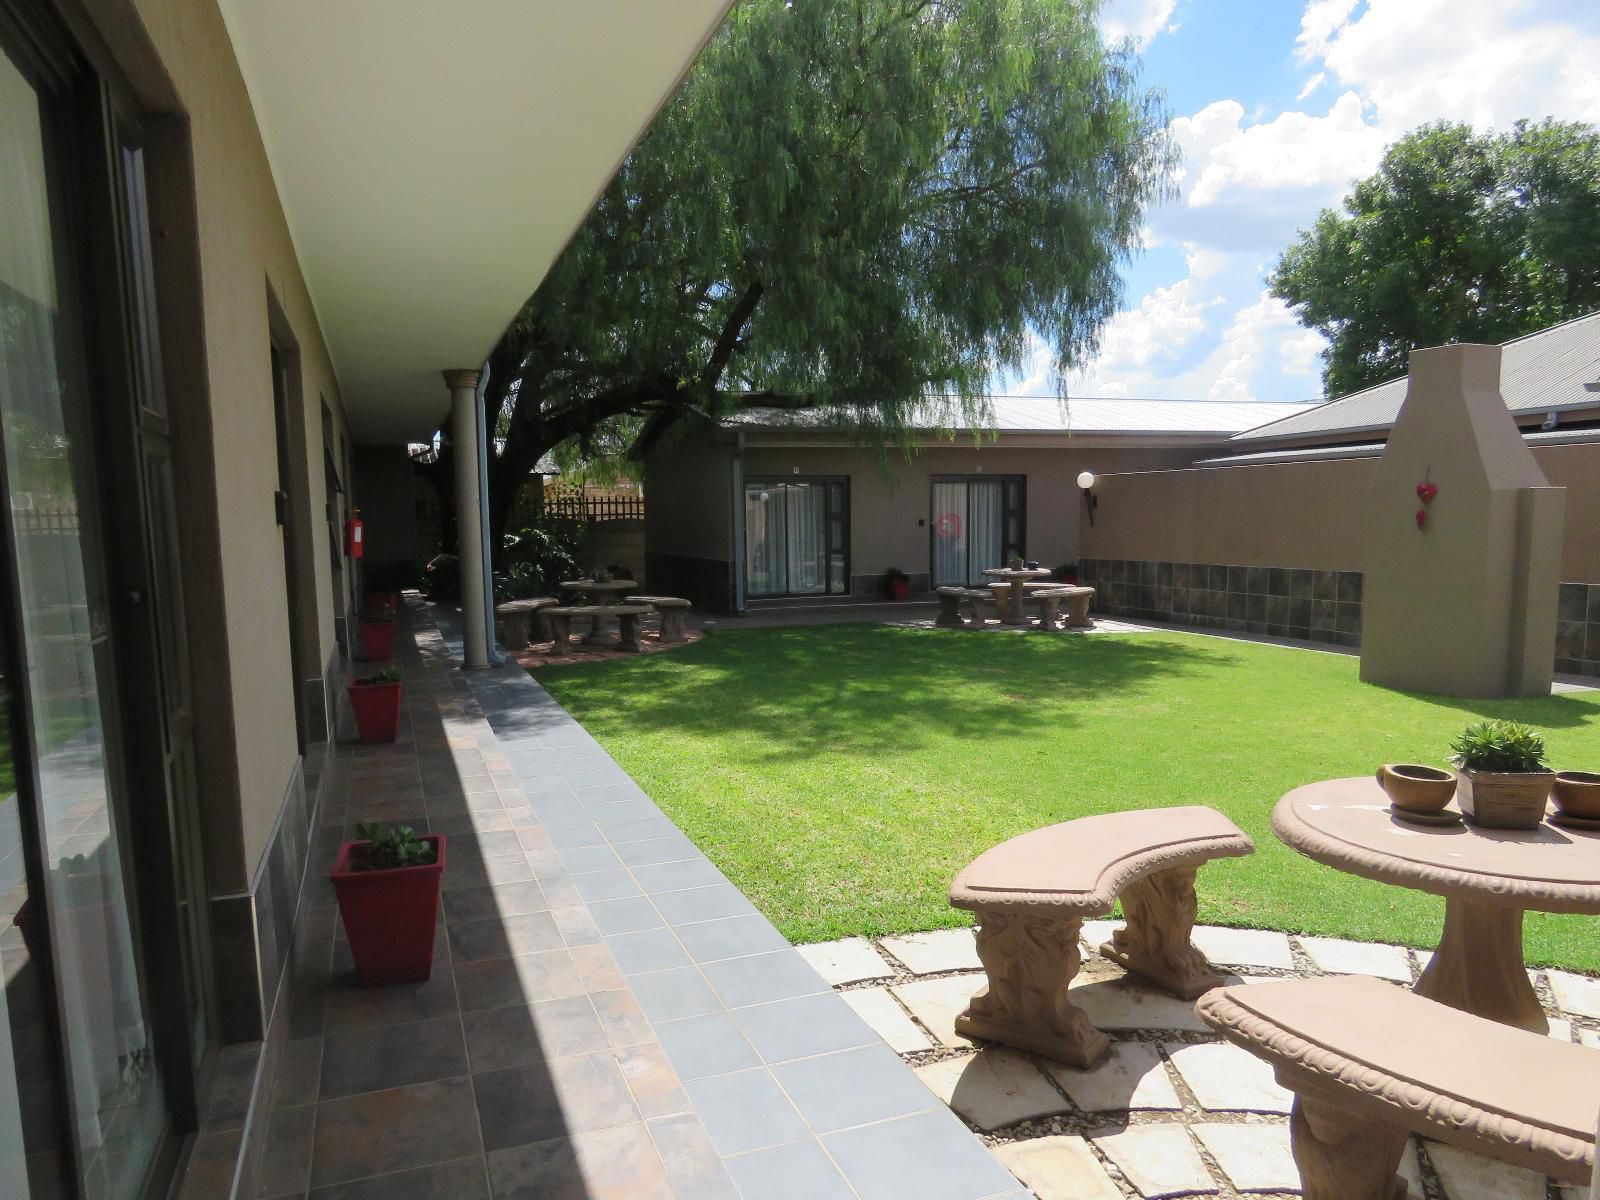 Andante Guesthouse Klerksdorp Klerksdorp North West Province South Africa House, Building, Architecture, Swimming Pool